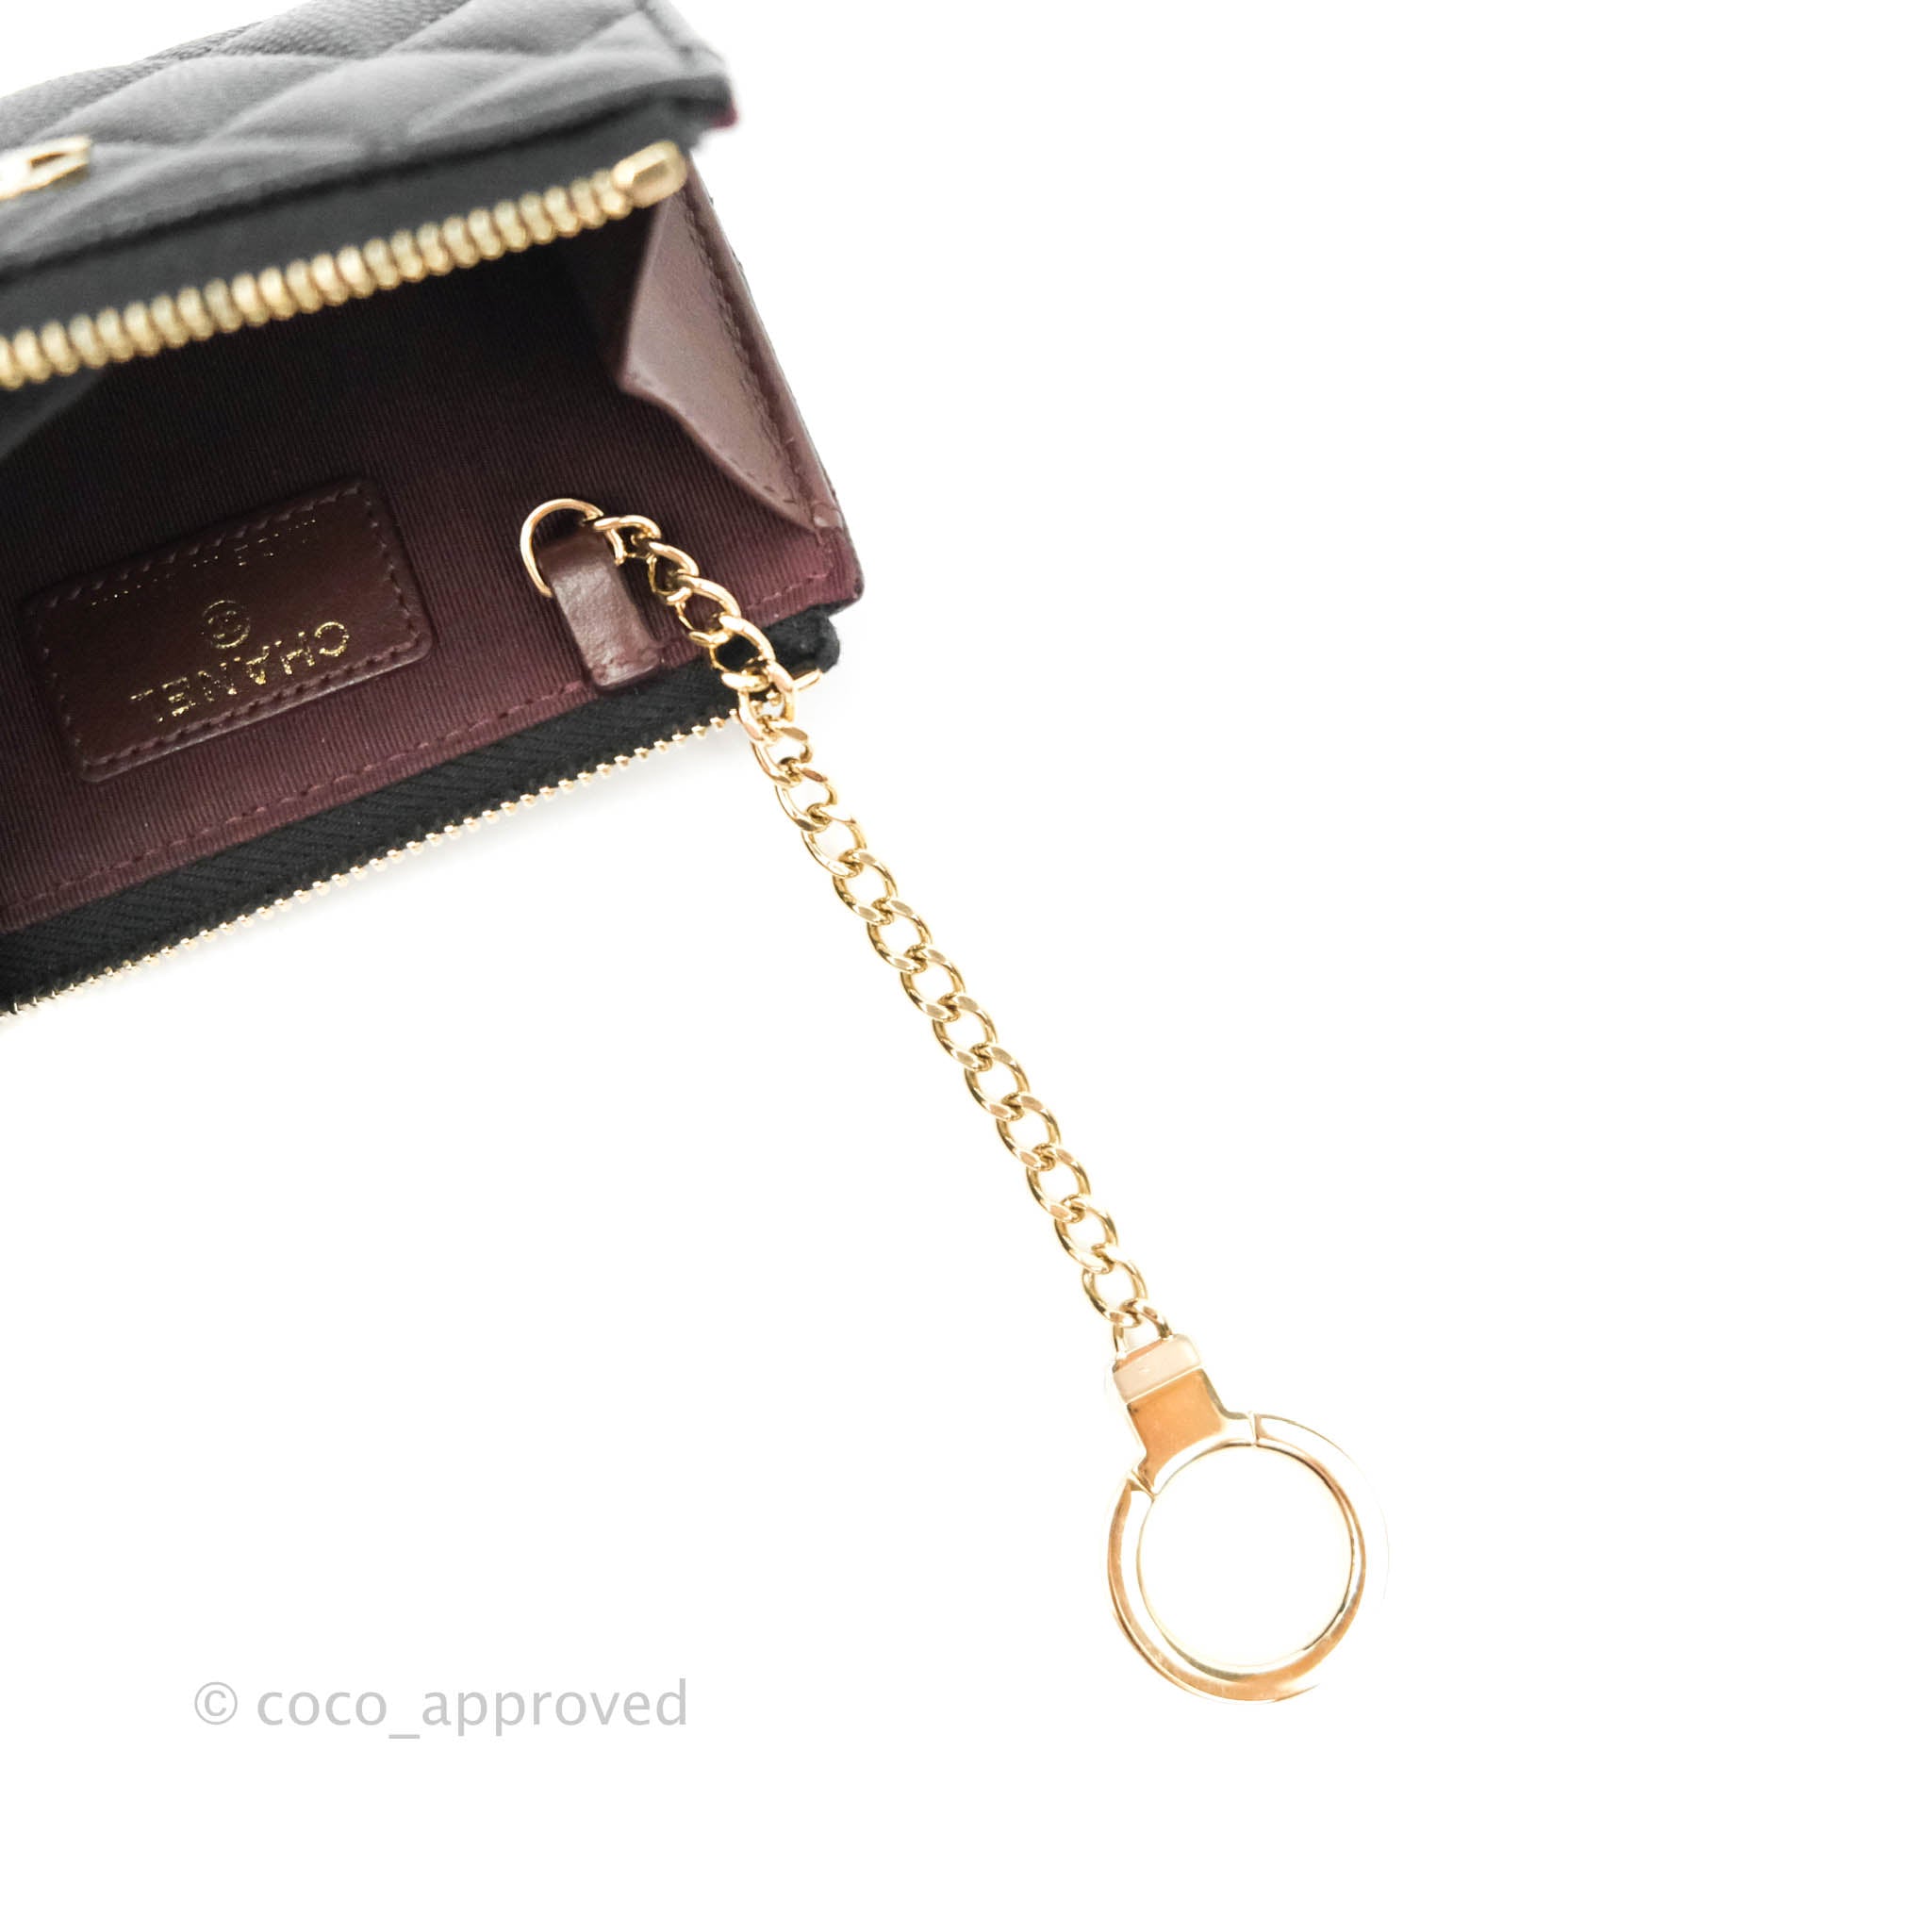 Chanel Classic Quilted Key holder Black Caviar Gold Hardware